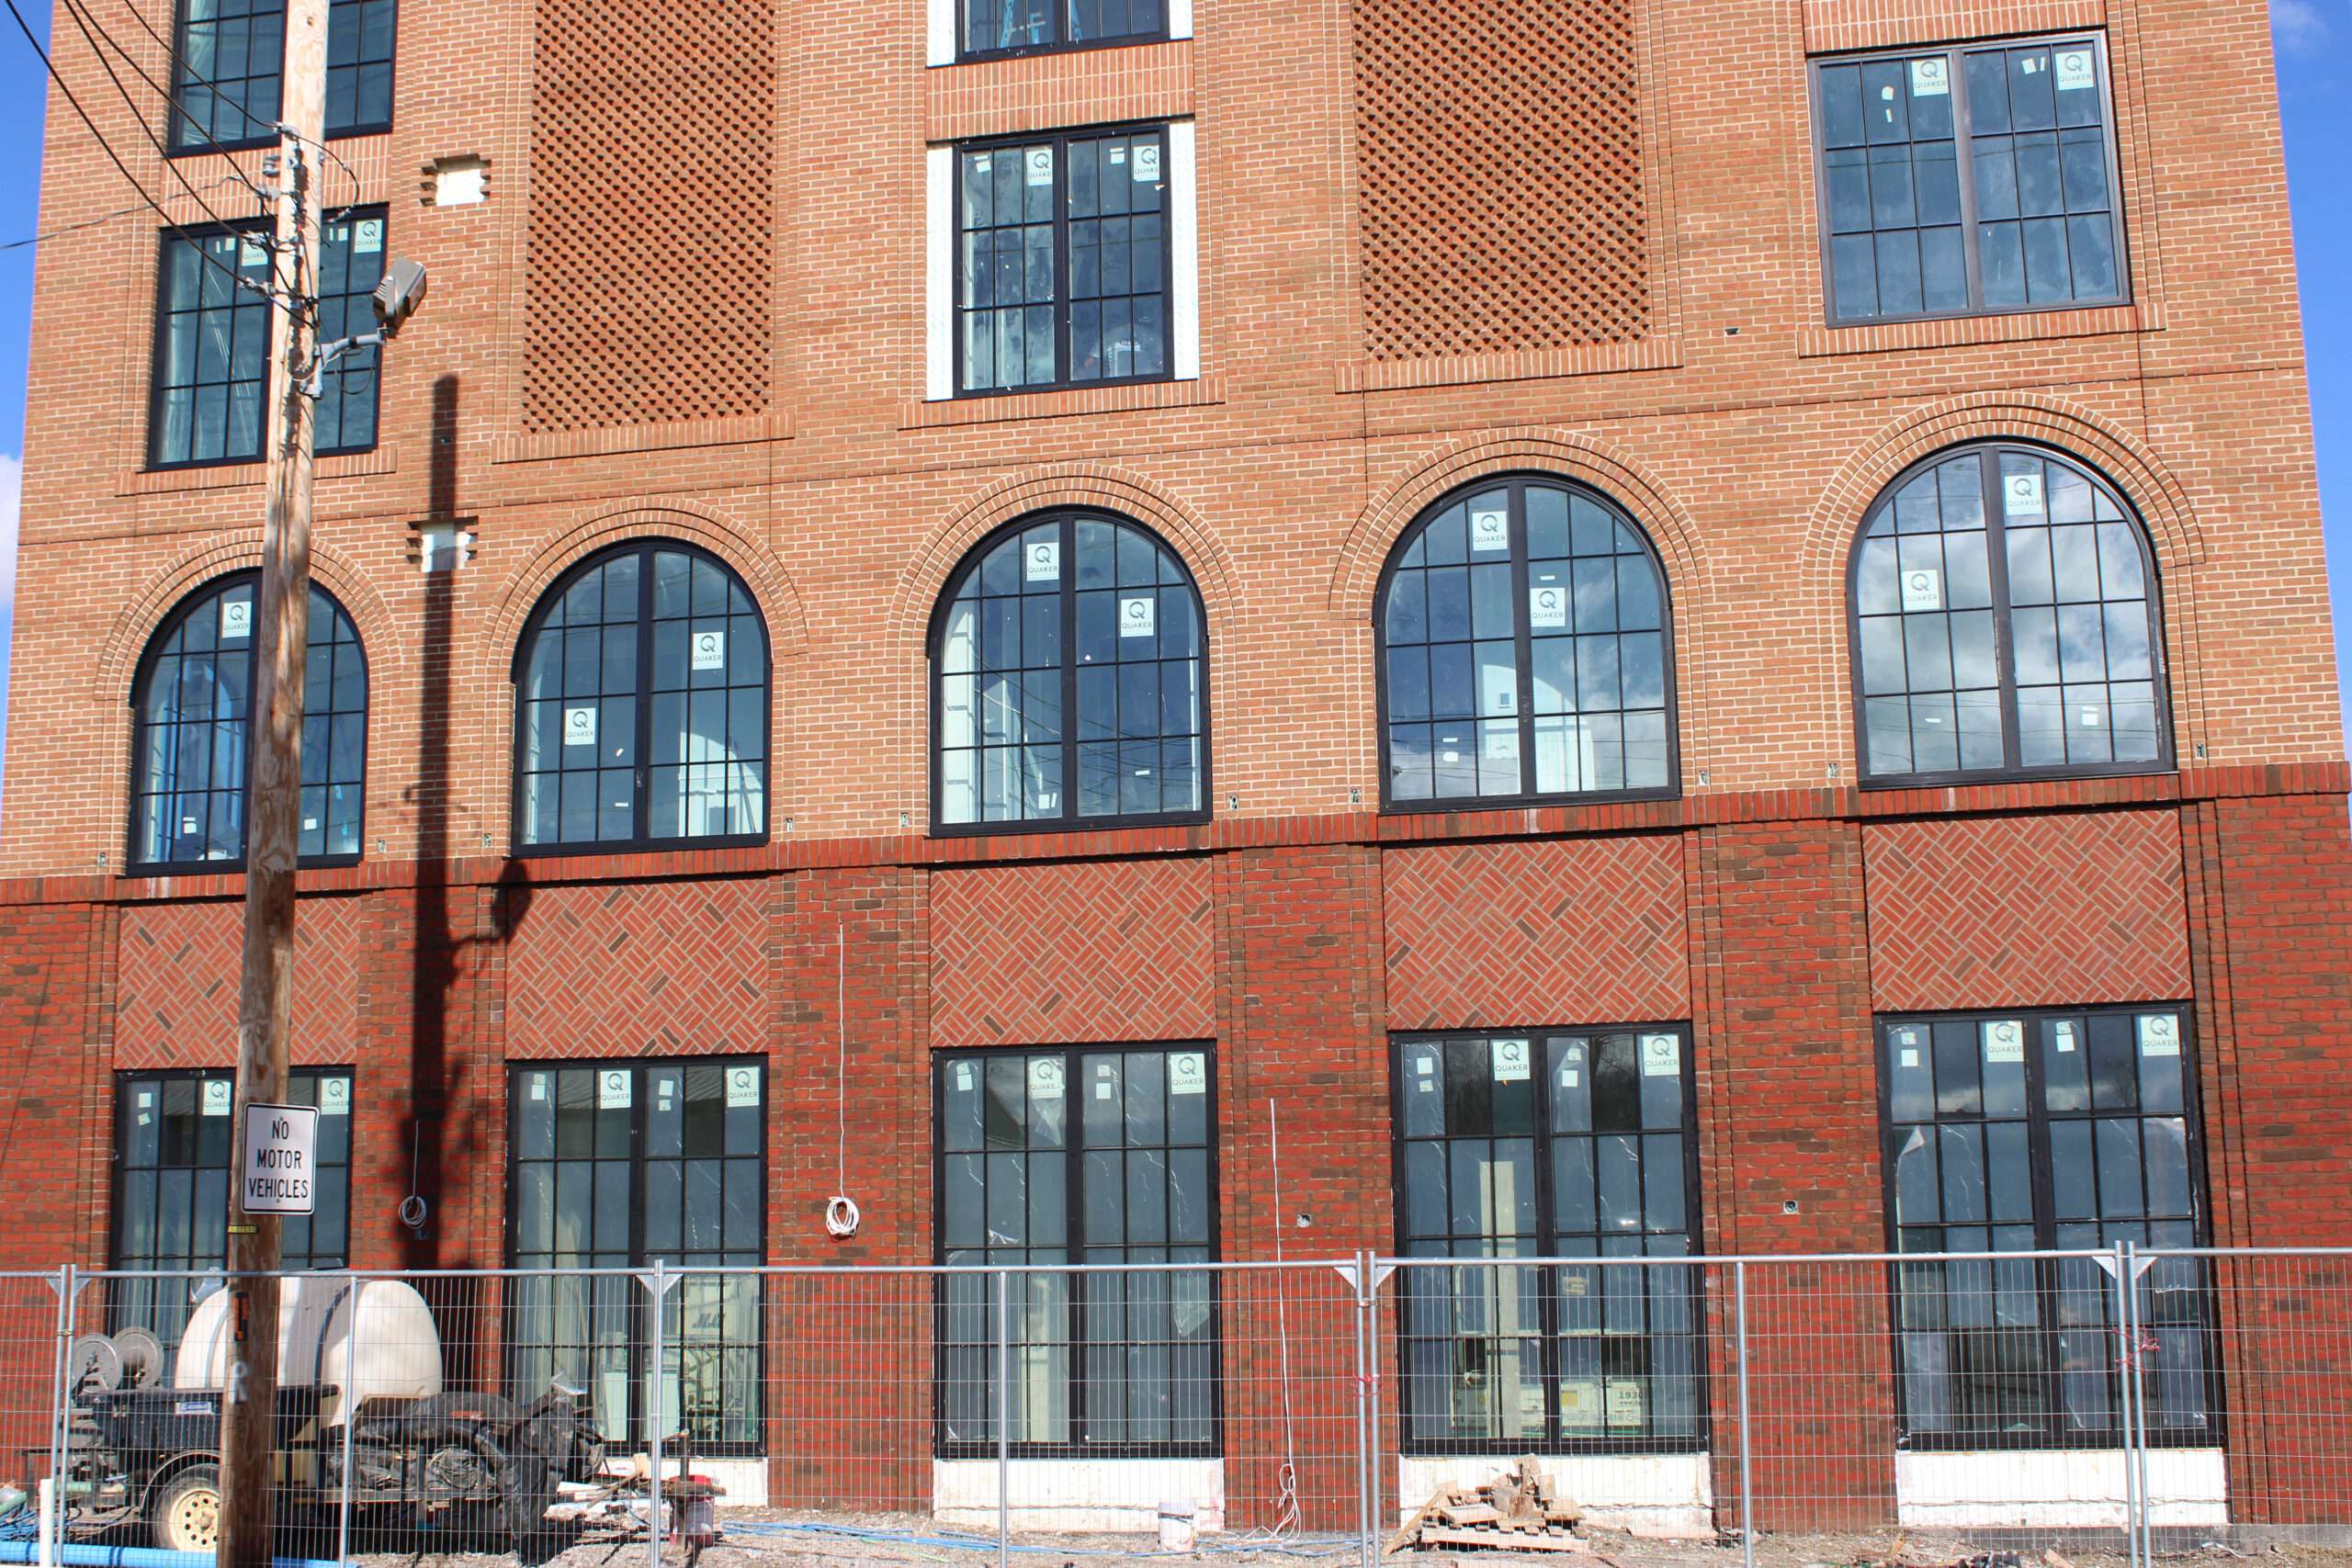 Photos: The Distillery District's new hotel nears completion